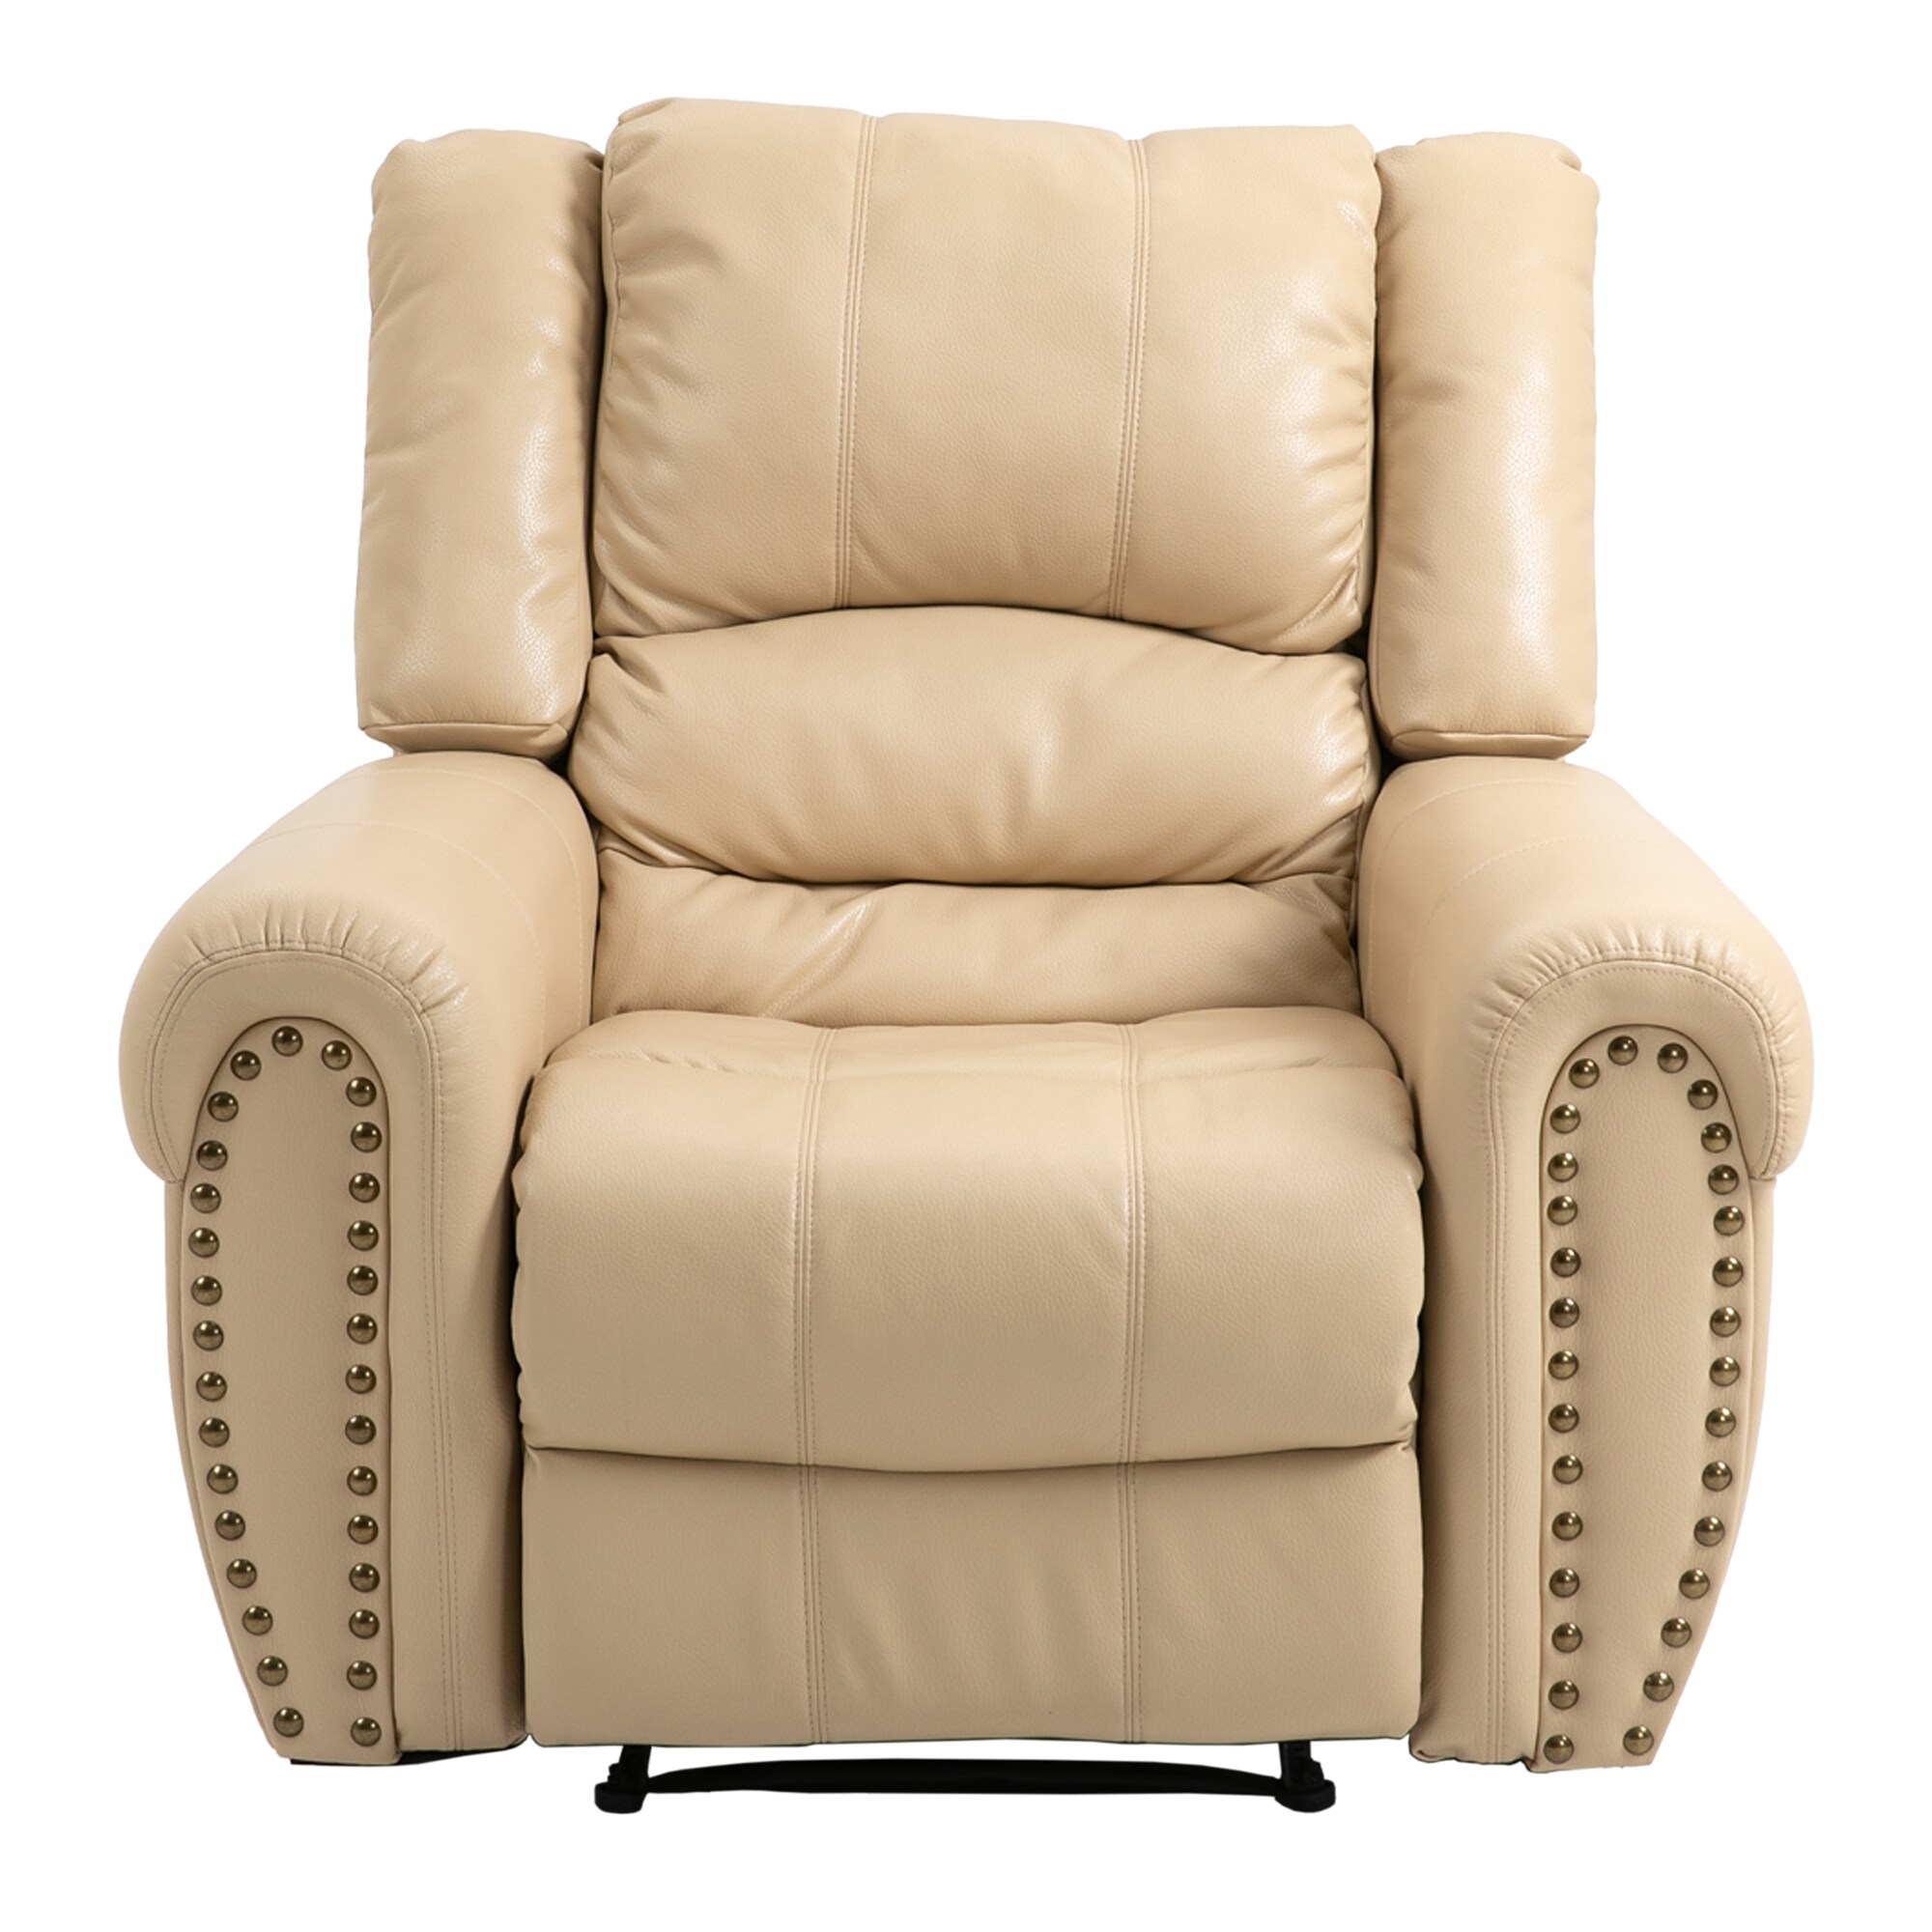 Faux Leather Manual Glider Club Recliner Living Room Furniture at Lowes.com